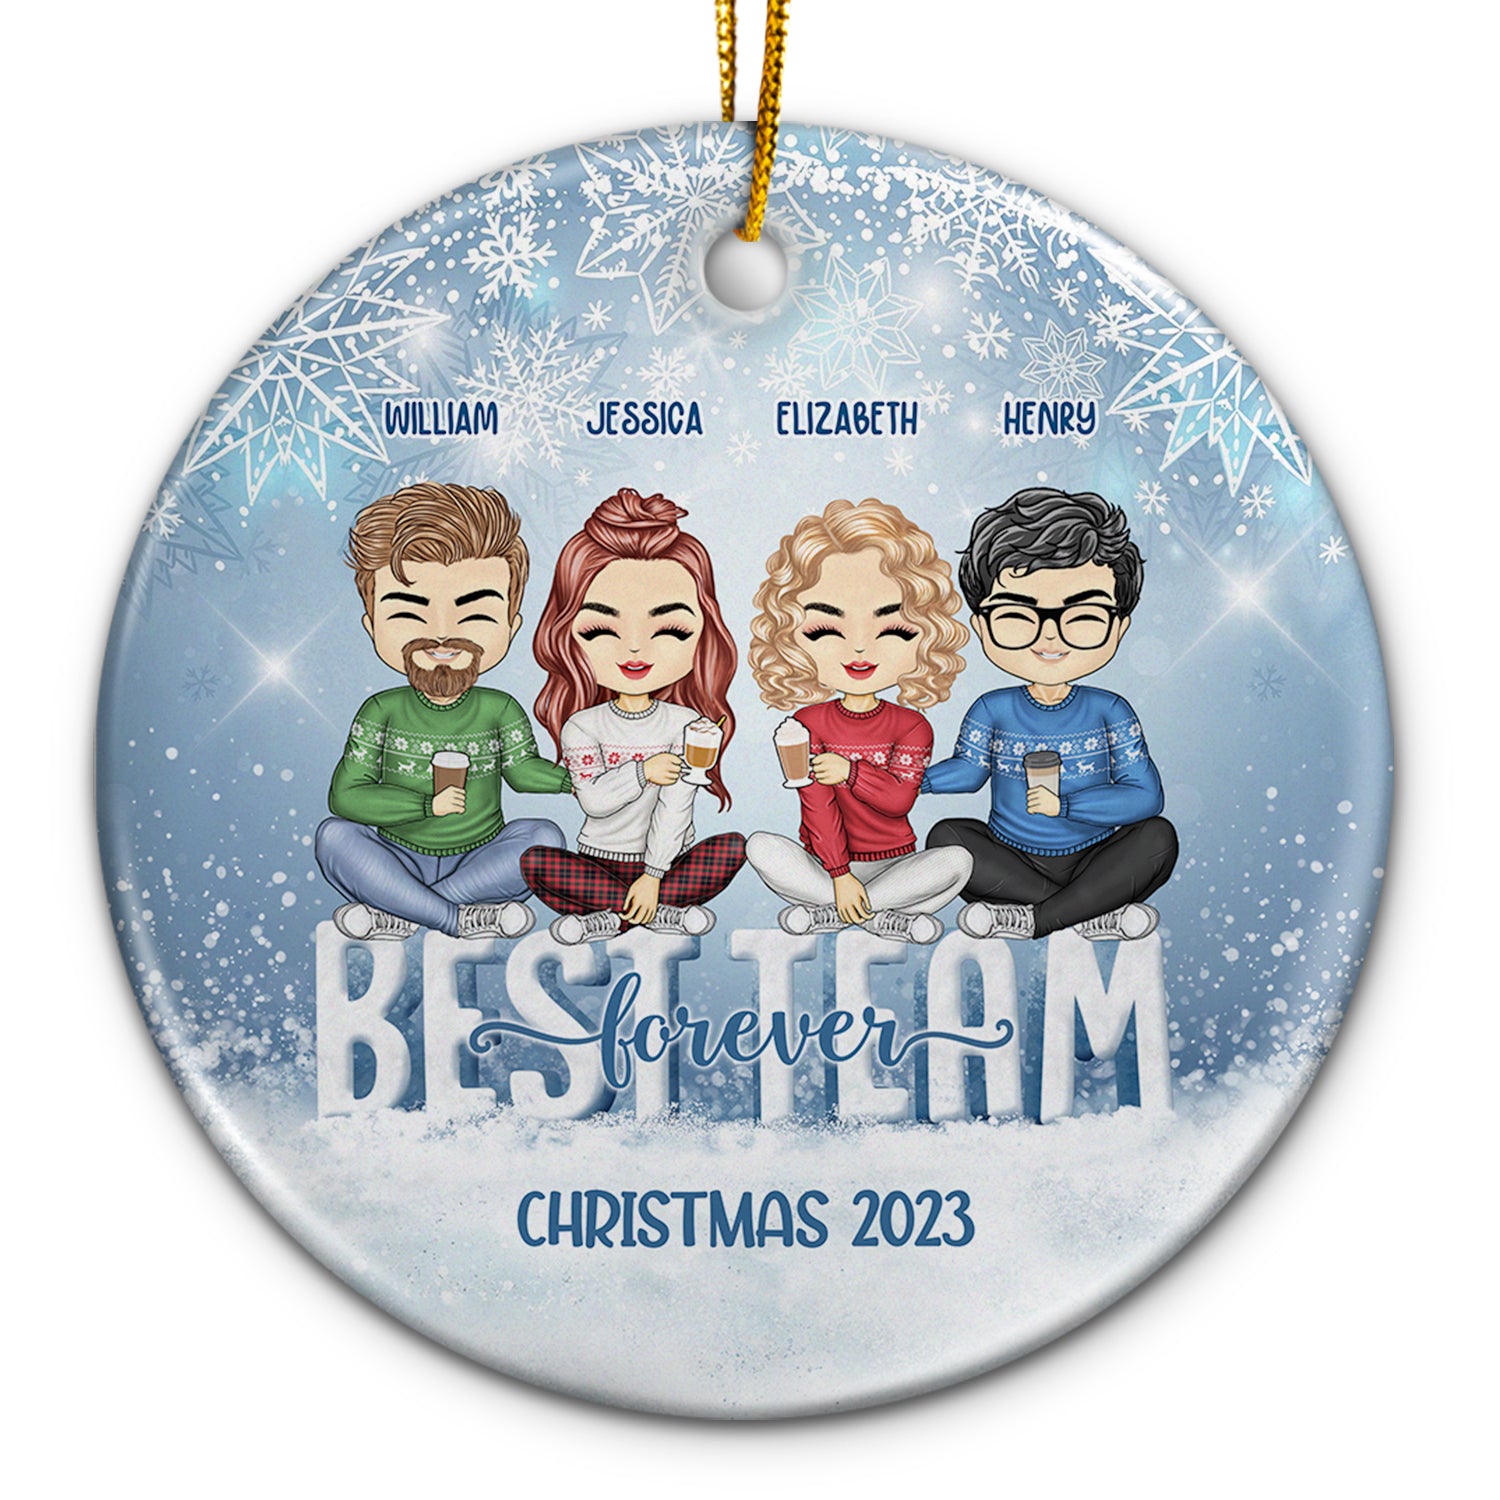 Best Team Forever - Christmas Gift For Colleagues And Best Friends - Personalized Custom Circle Ceramic Ornament